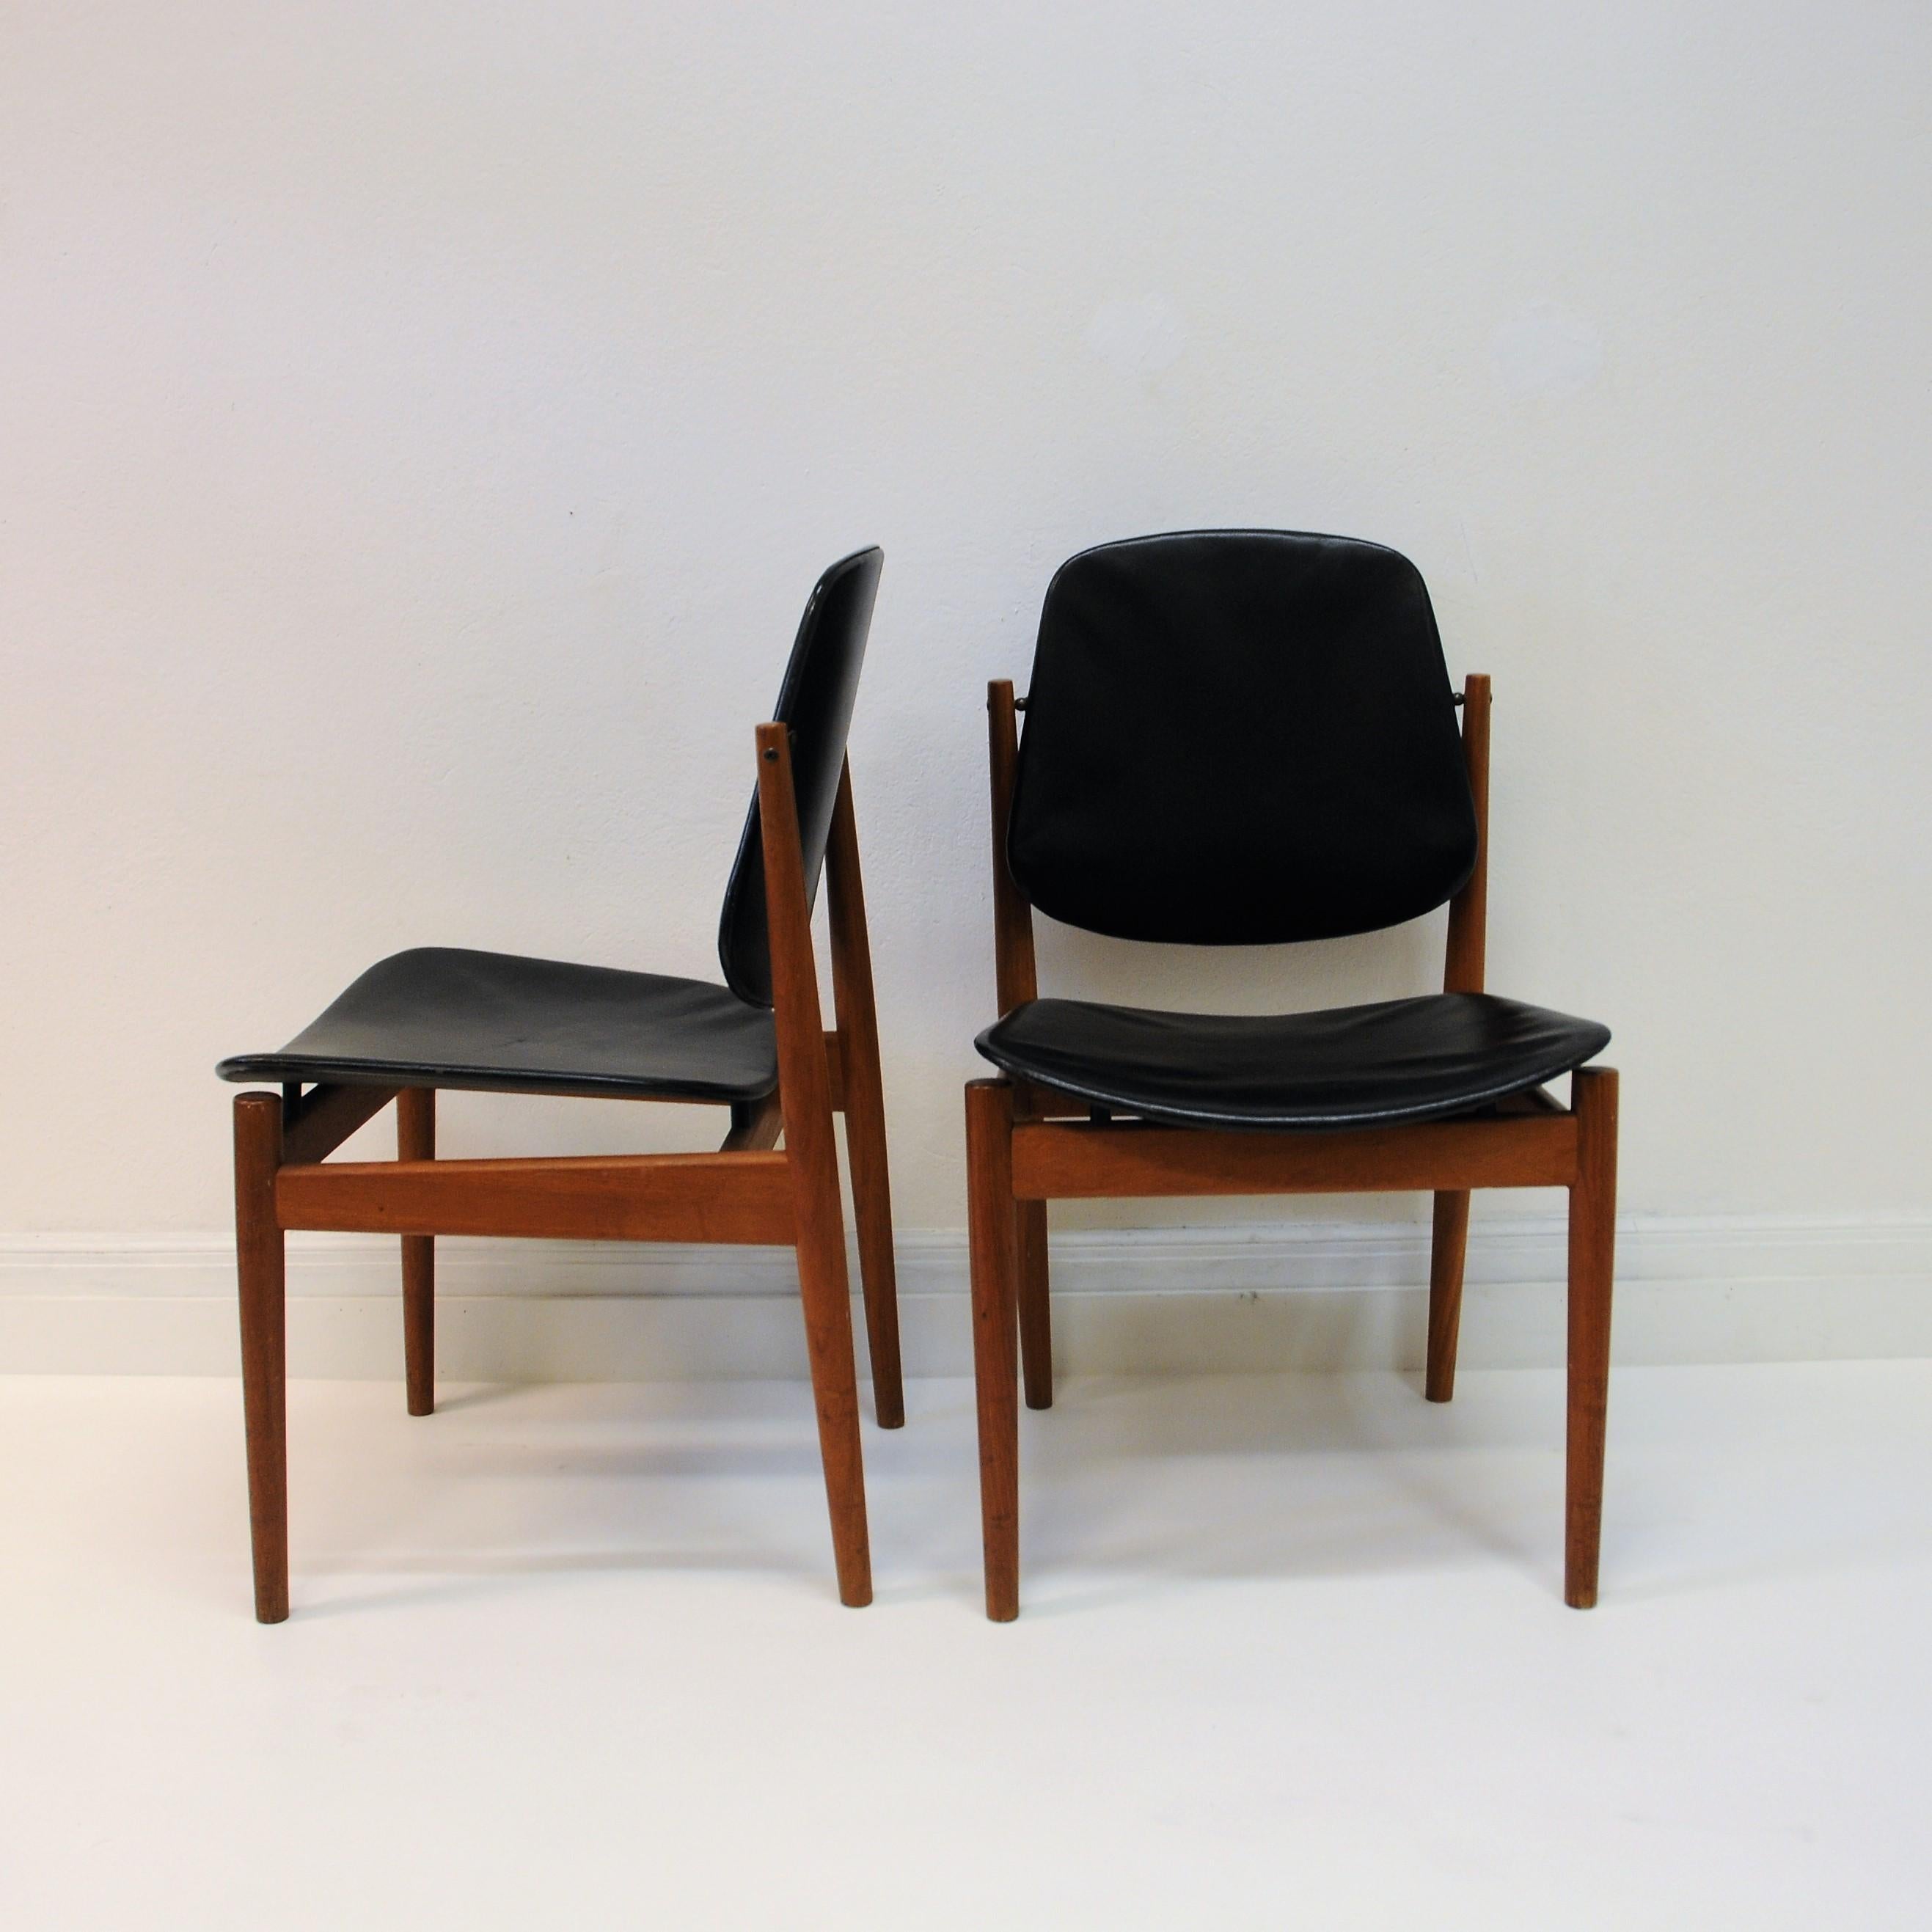 Blackened Danish pair of  Diningchairs by Arne Vodder in teak and black leather, 1950s